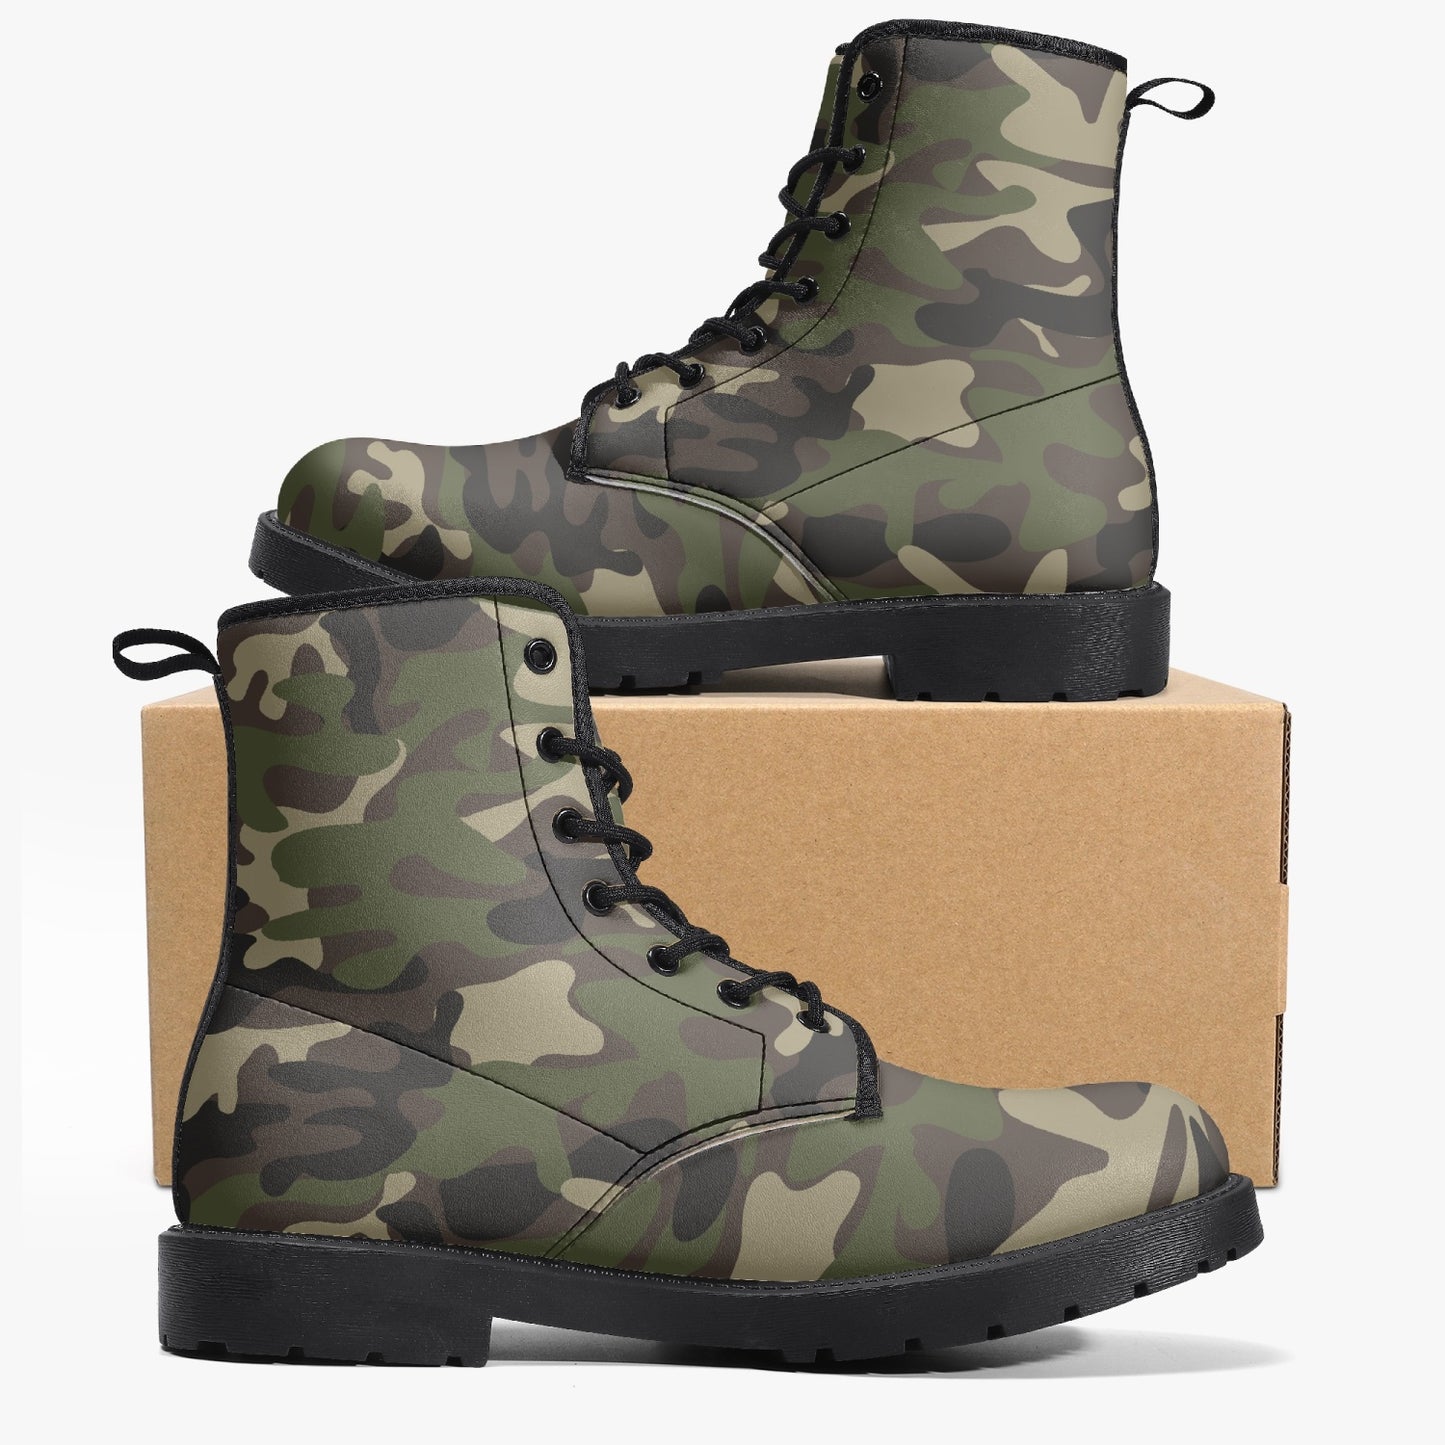 Camouflage Men Vegan Leather Combat Boots, Green Army Camo Lace Up Shoes Hiking Festival Black Ankle Work Winter Casual Custom